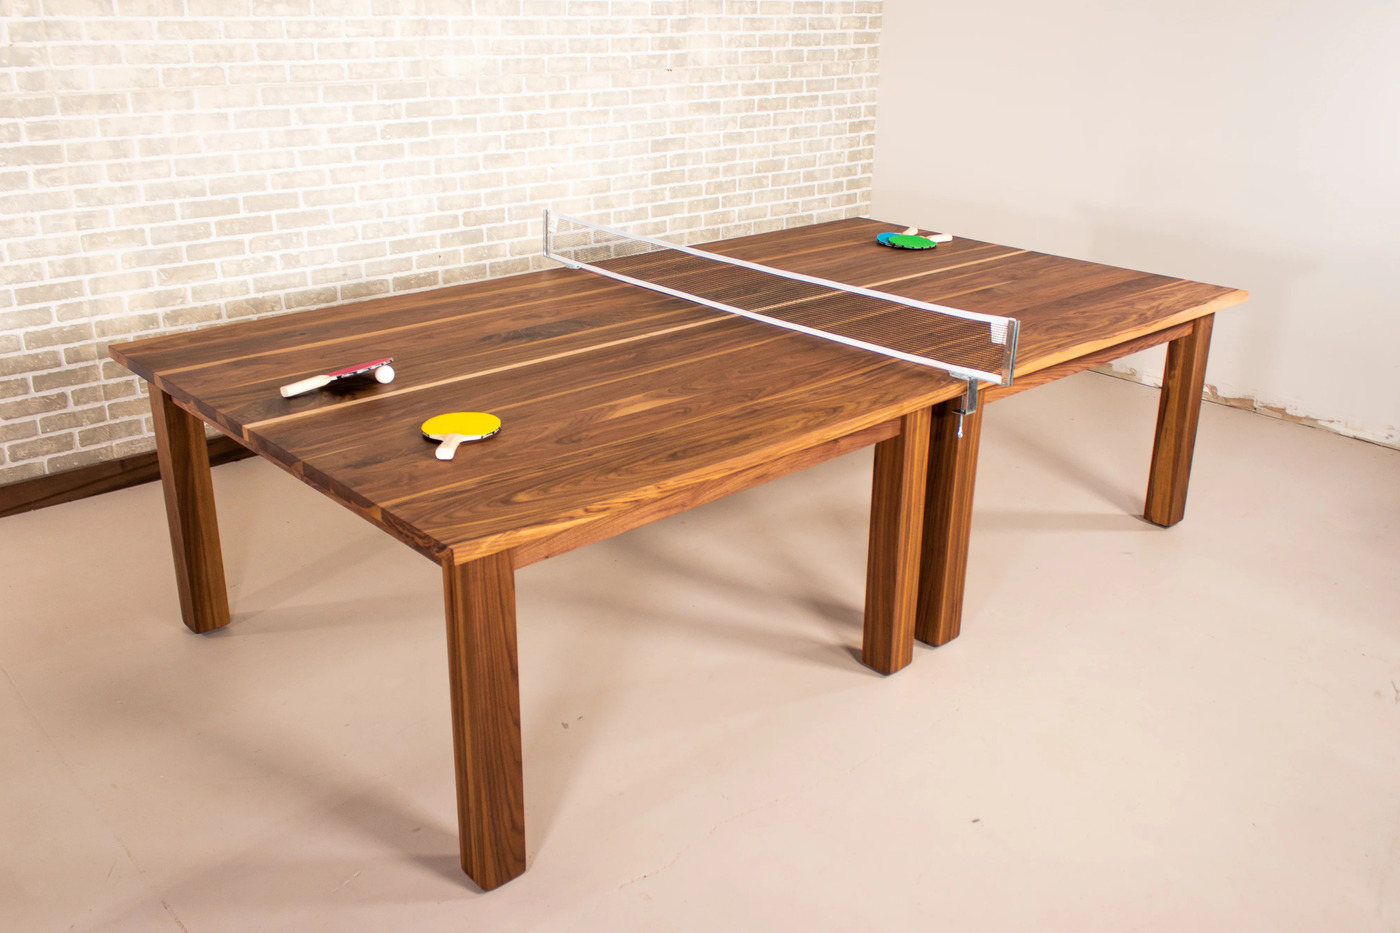 How To Build A Ping Pong Table